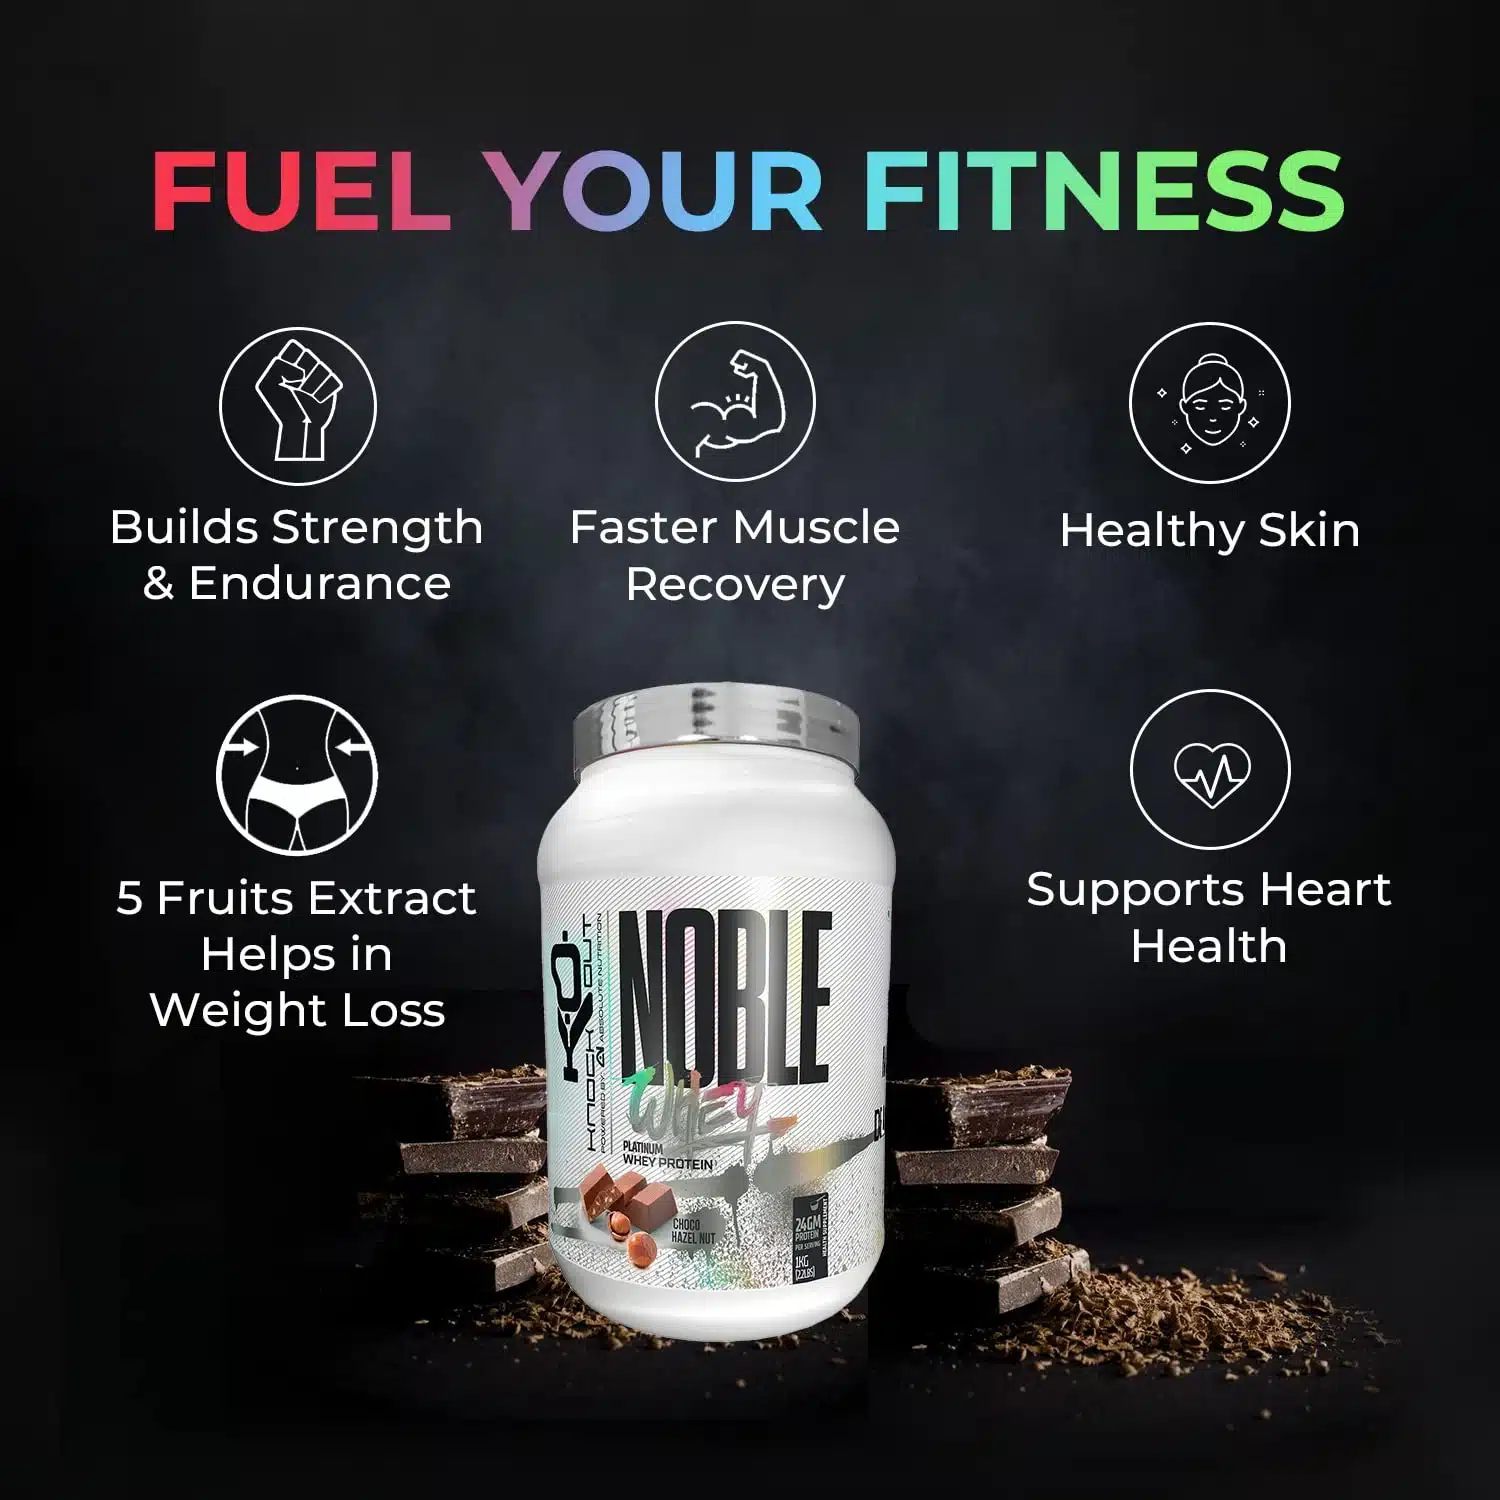 Noble Whey Protein 1Kg (Choco Hazelnut), 24g Protein Per Serving For Muscle Building, Strength, And Endurance With Digestive Enzymes, 5 Fruits Extract For Weight Management4.